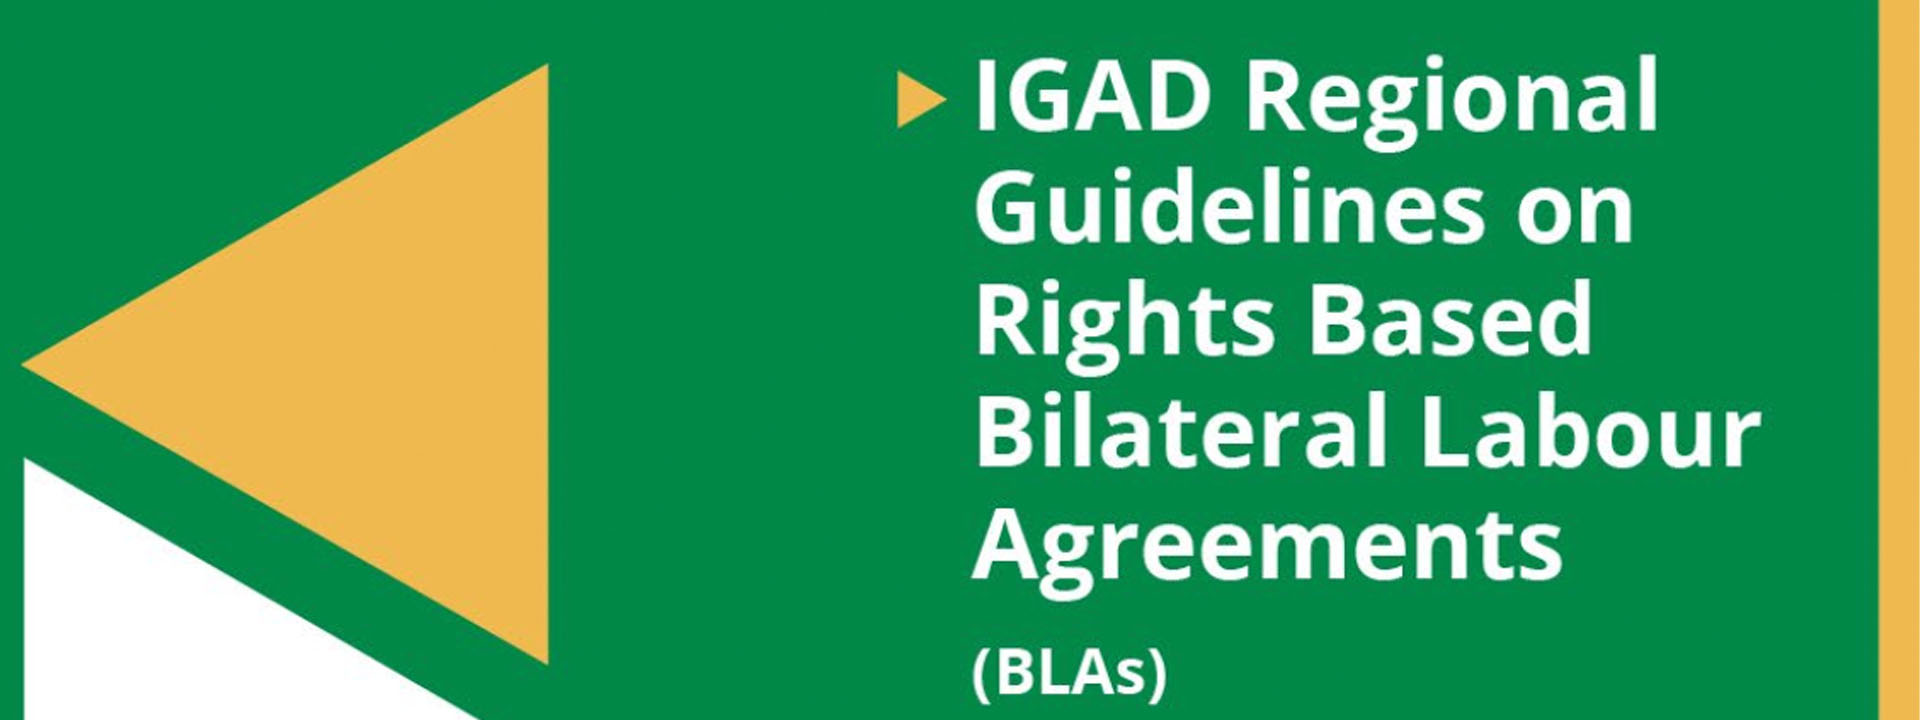 IGAD Regional Guidelines on Rights Based Bilateral Labour Agreements (BLAs)